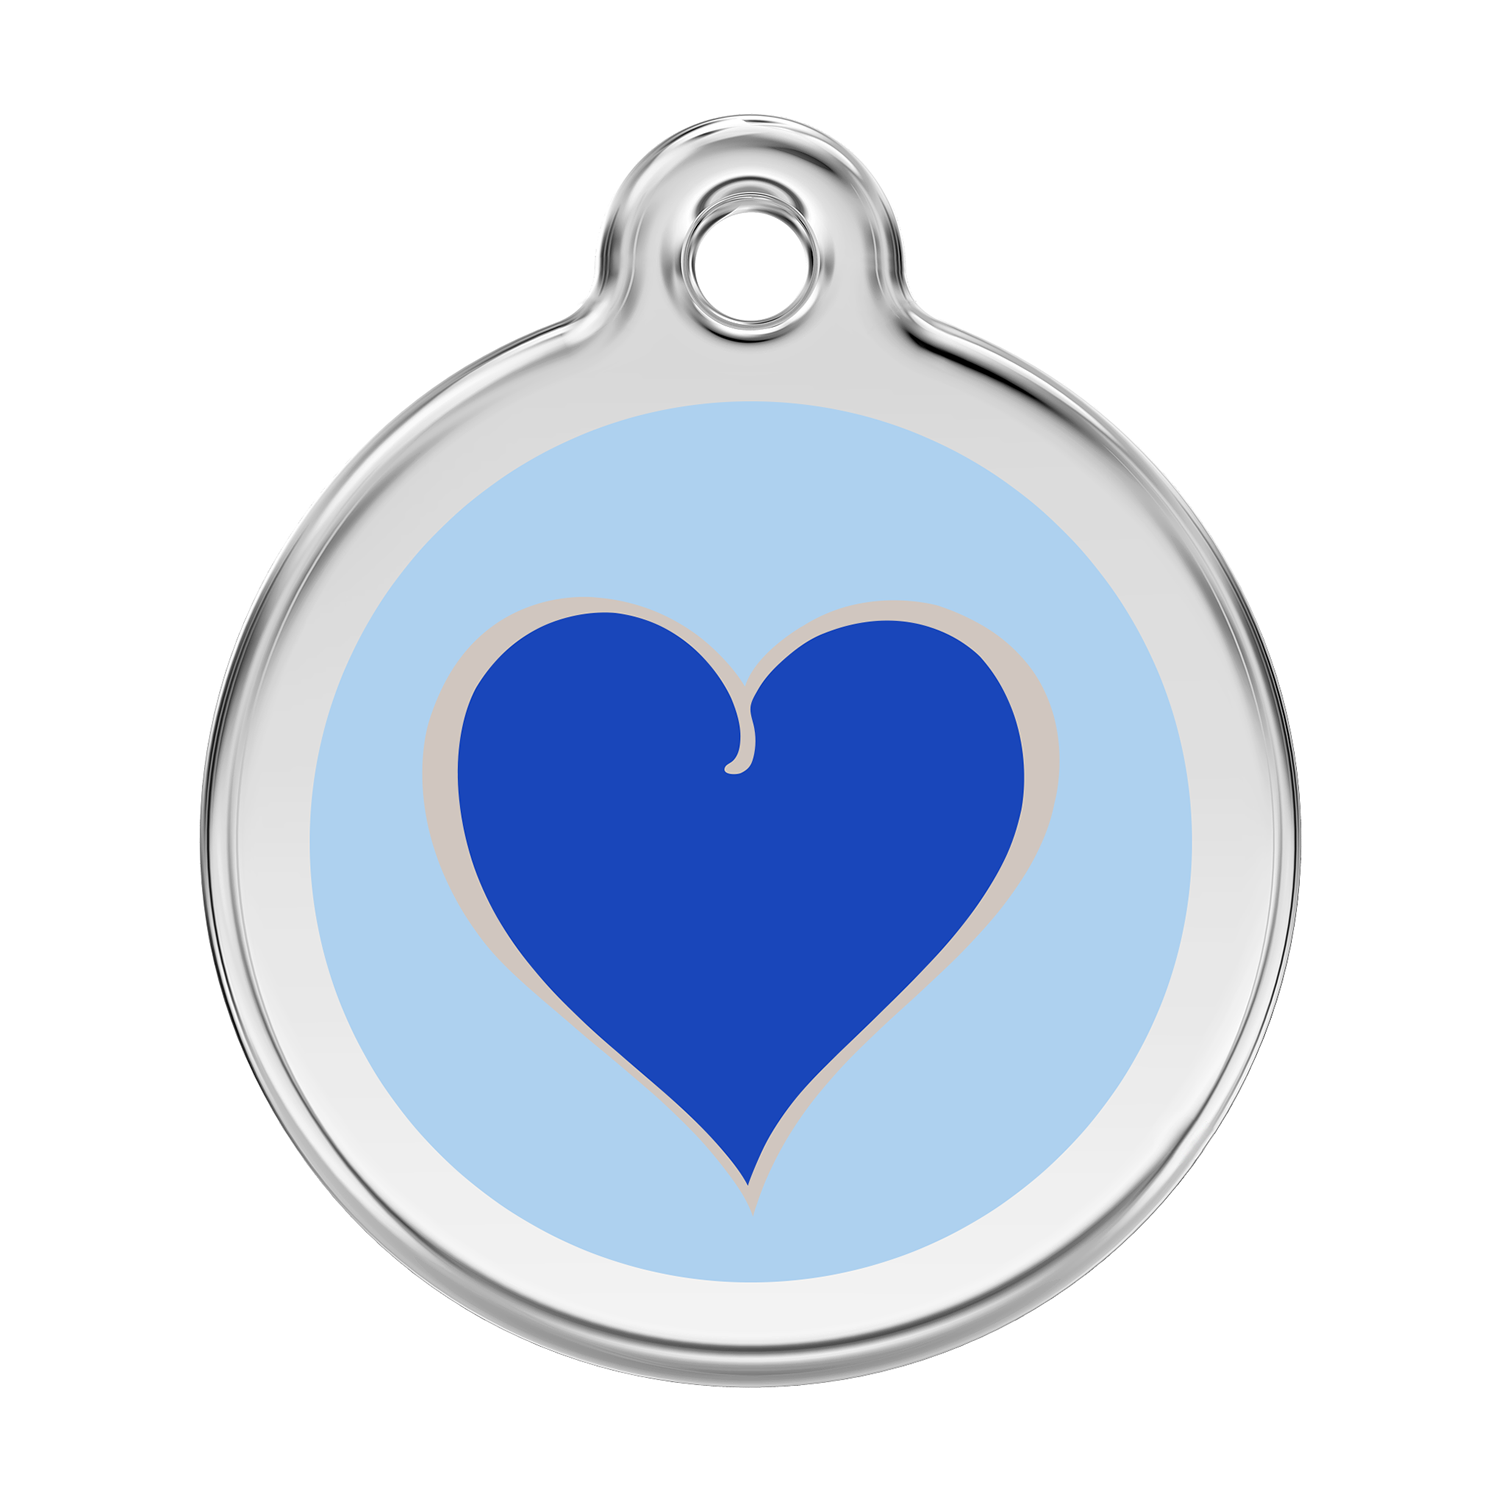 Red Dingo Stainless Steel & Enamel Blue Heart Dog ID Tag